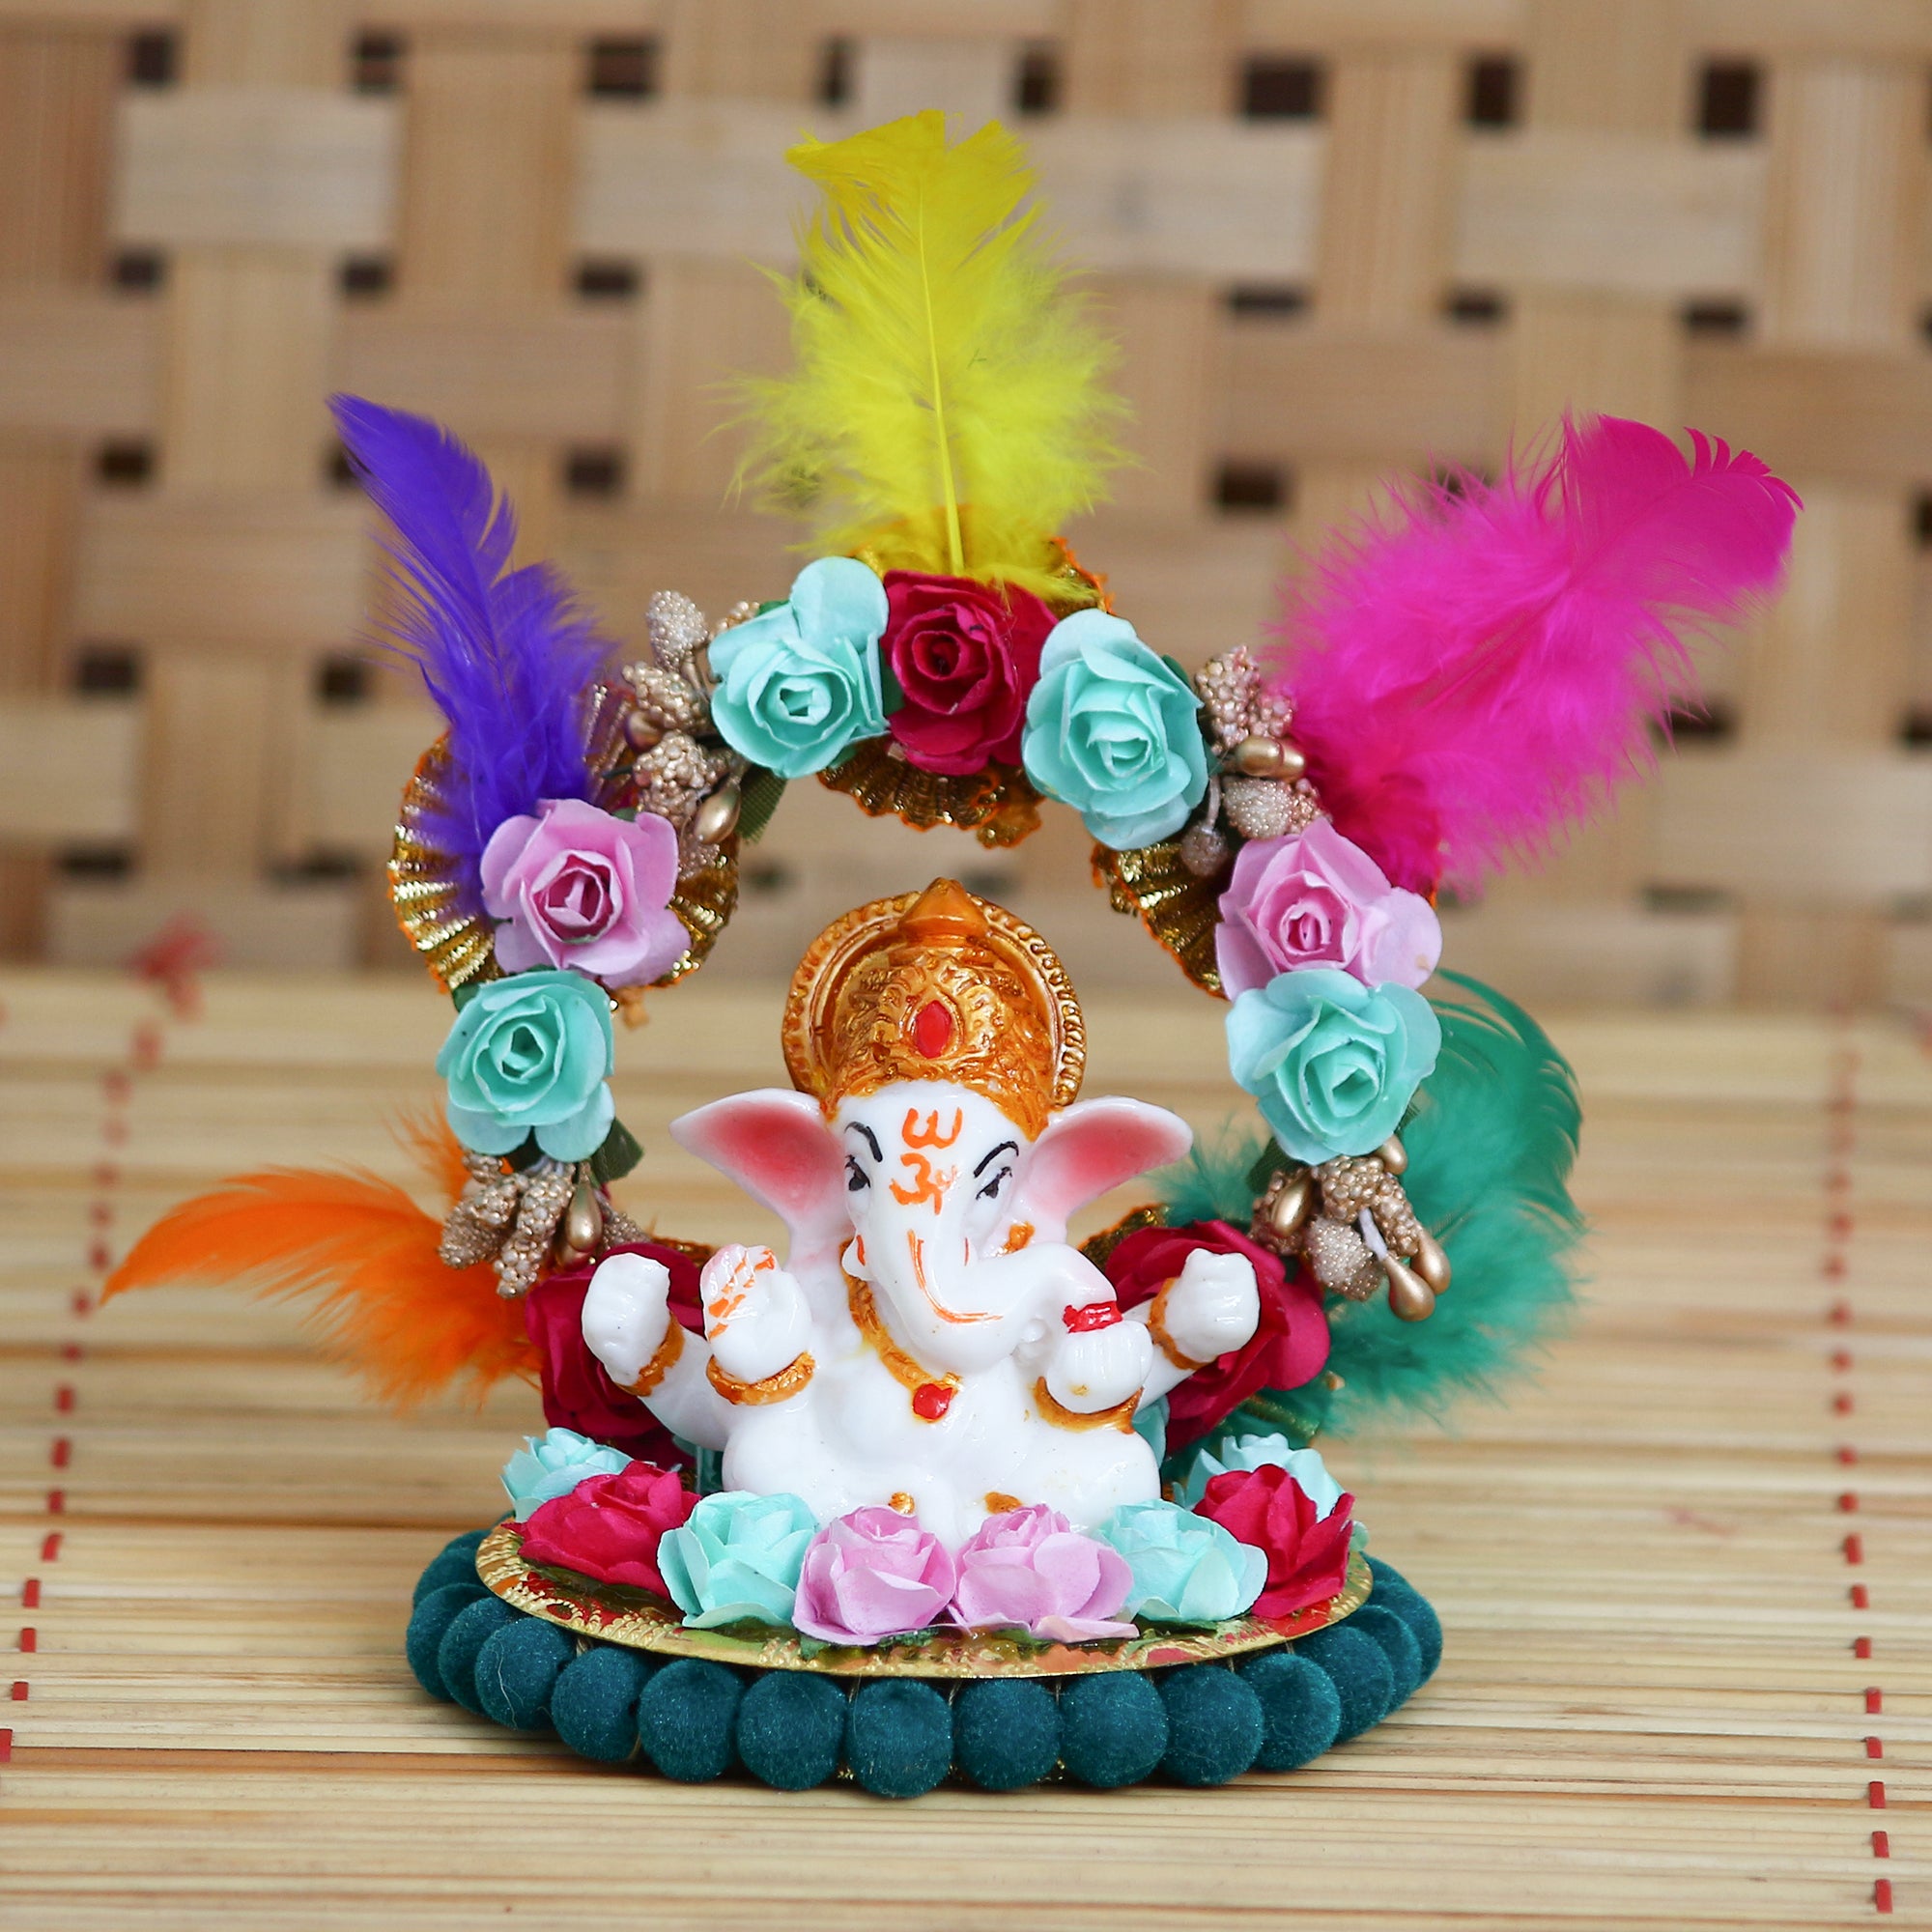 Lord Ganesha Idol On Decorative Handcrafted Plate With Throne Of Colorful Flowers And Feathers